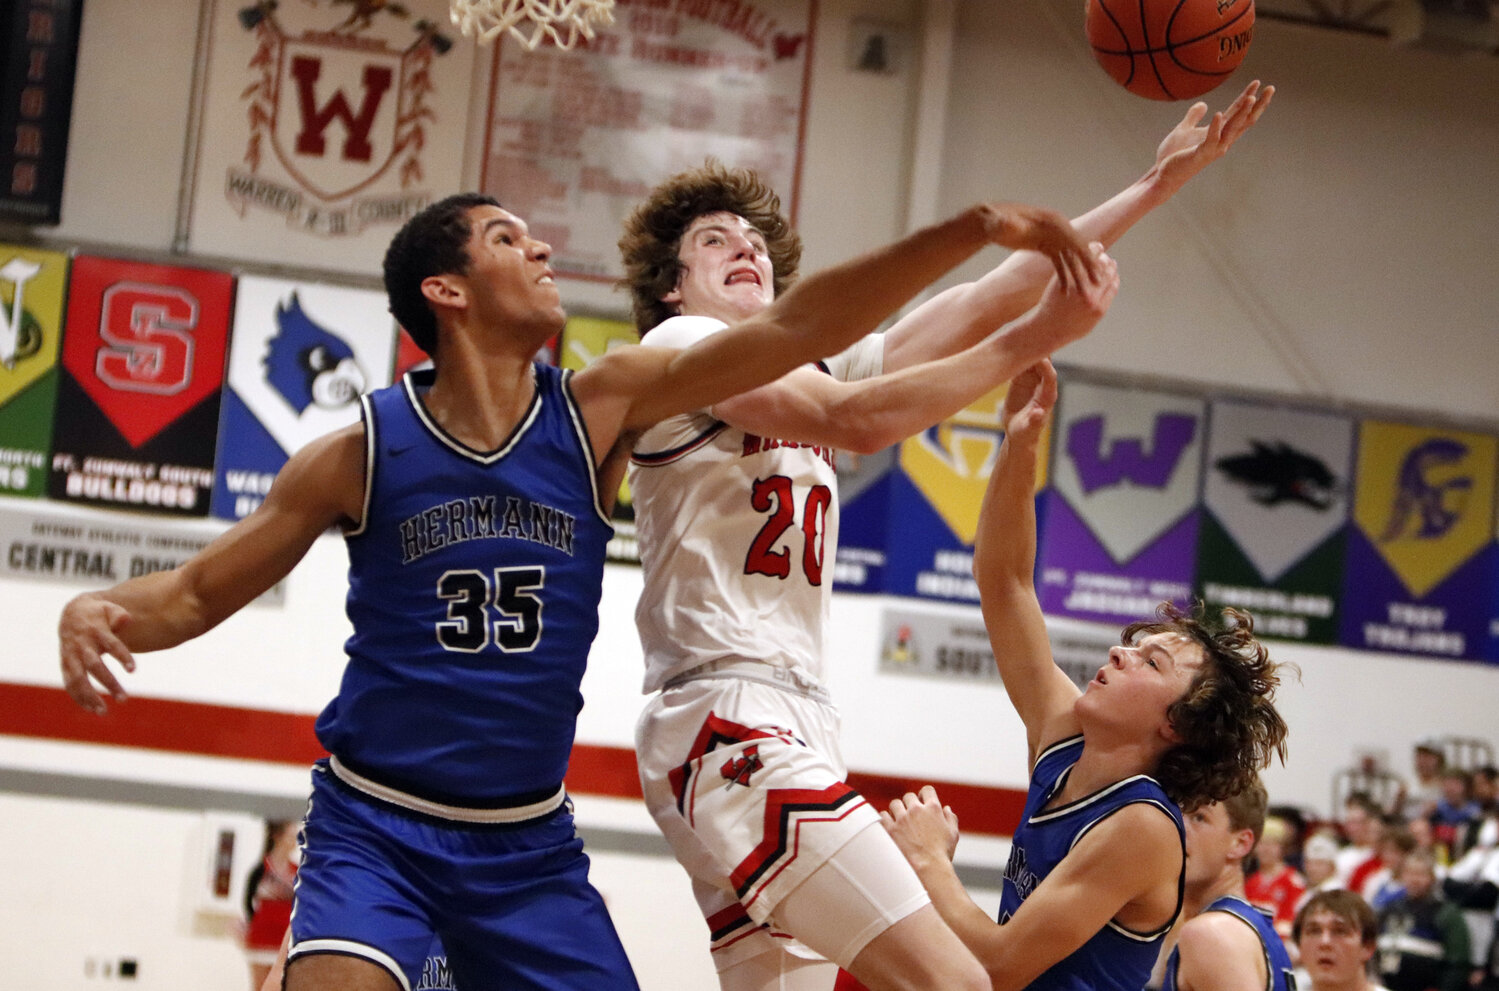 Troy Anderson attempts a layup over Hermann center Daeden Hopkins during the first half of Warrenton’s win over Hermann on Friday night.